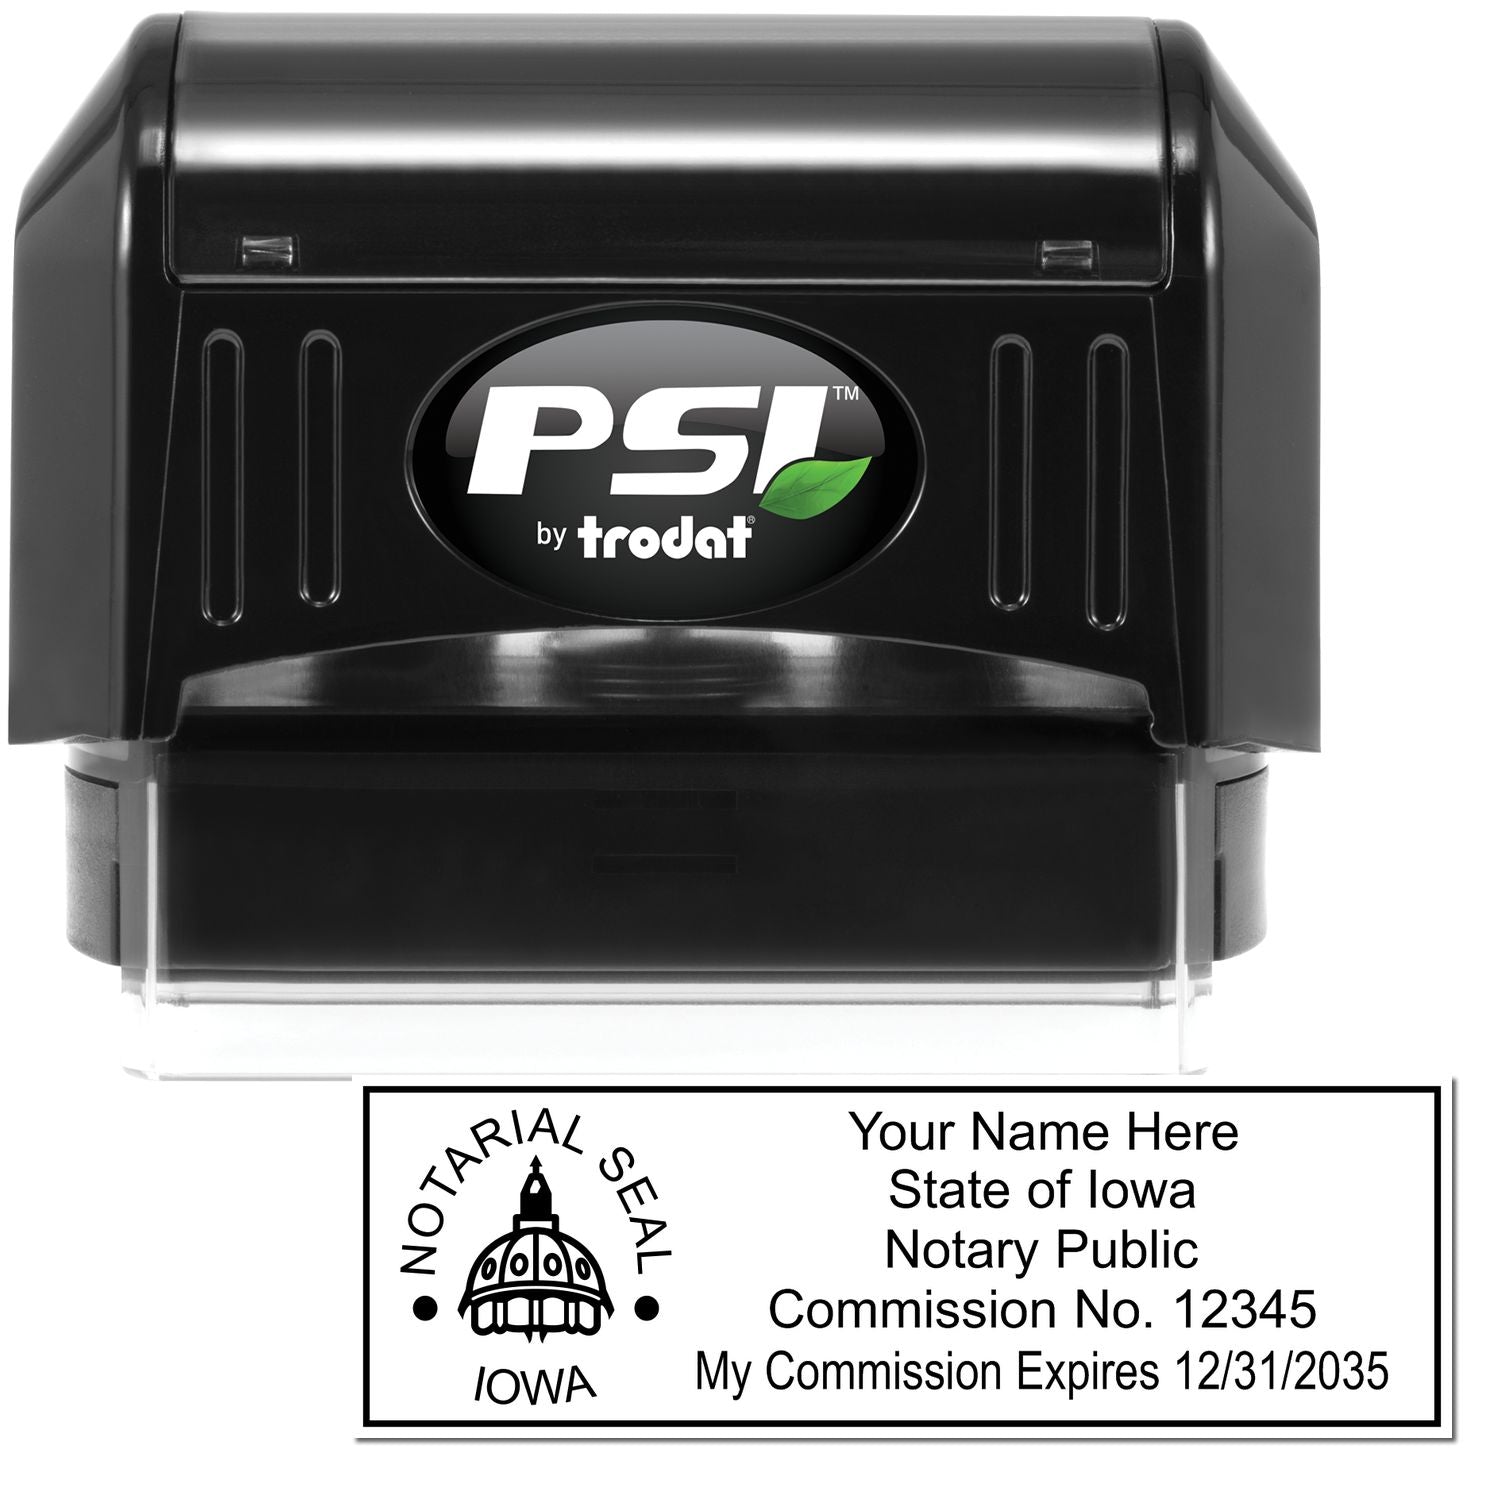 The main image for the PSI Iowa Notary Stamp depicting a sample of the imprint and electronic files